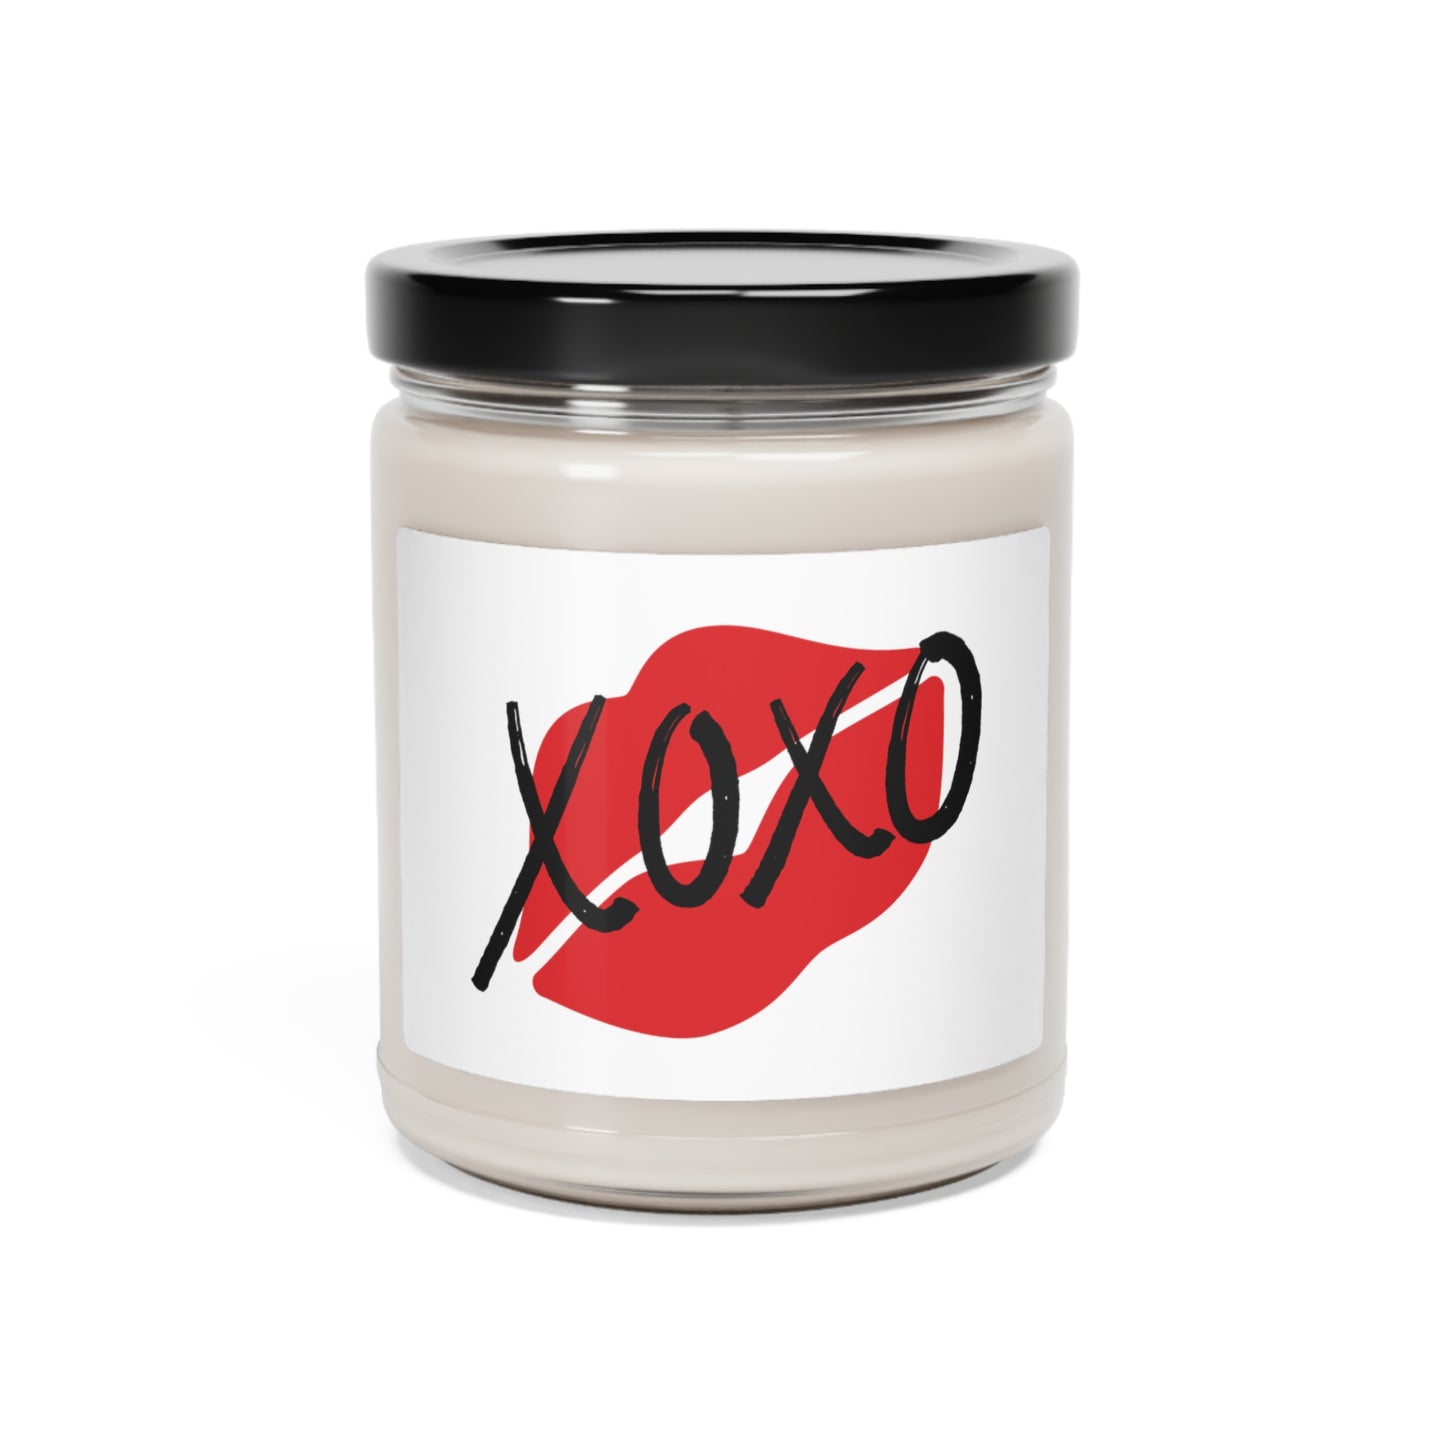 XOXO Kiss Valentines Day Themed Apple Harvest Scented Soy Candle, 9oz